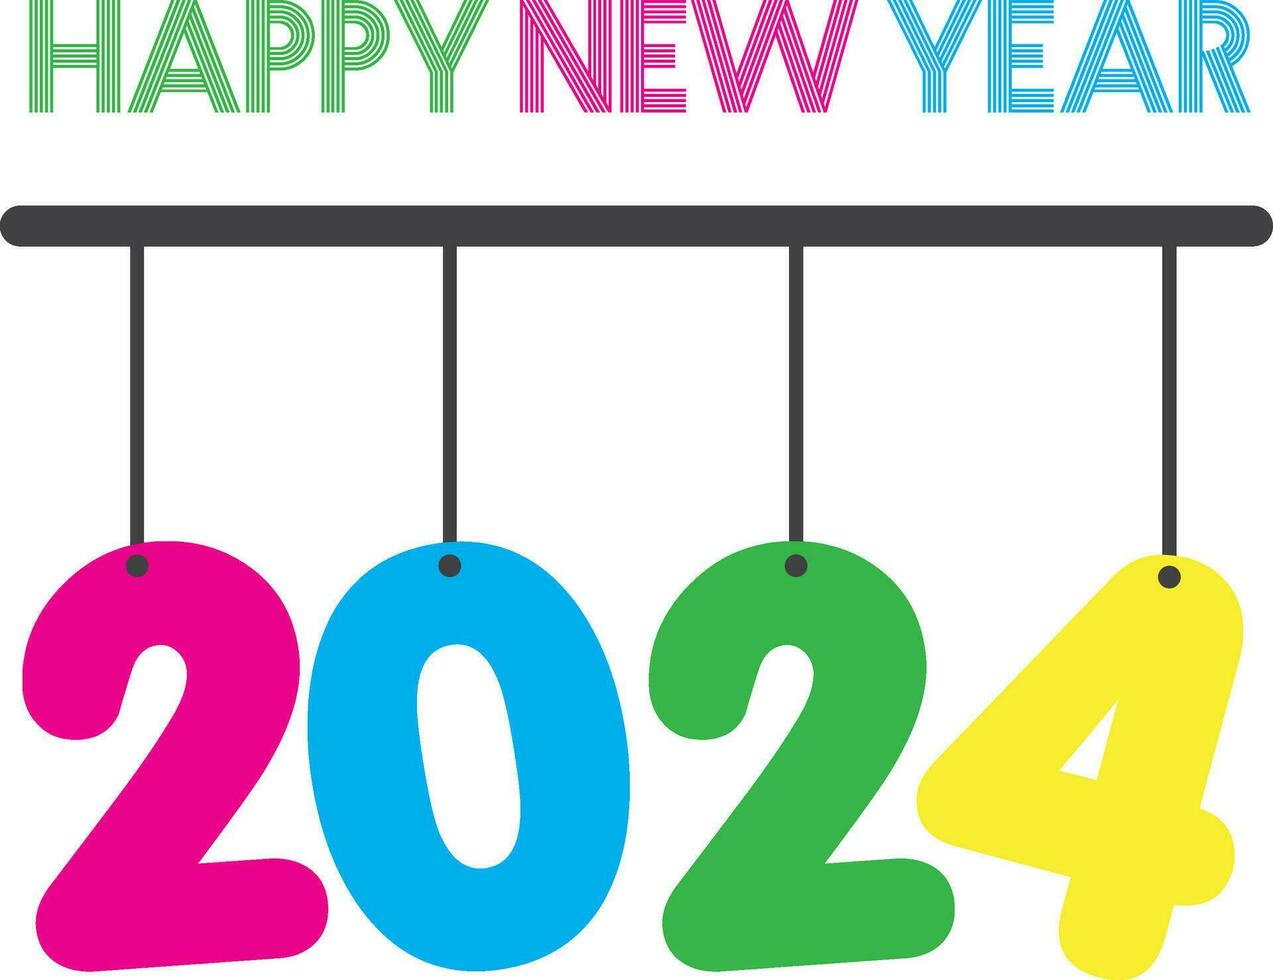 Inscription Happy New Year 2024 made of colorful letters on white background. Hanging colorful typography vector